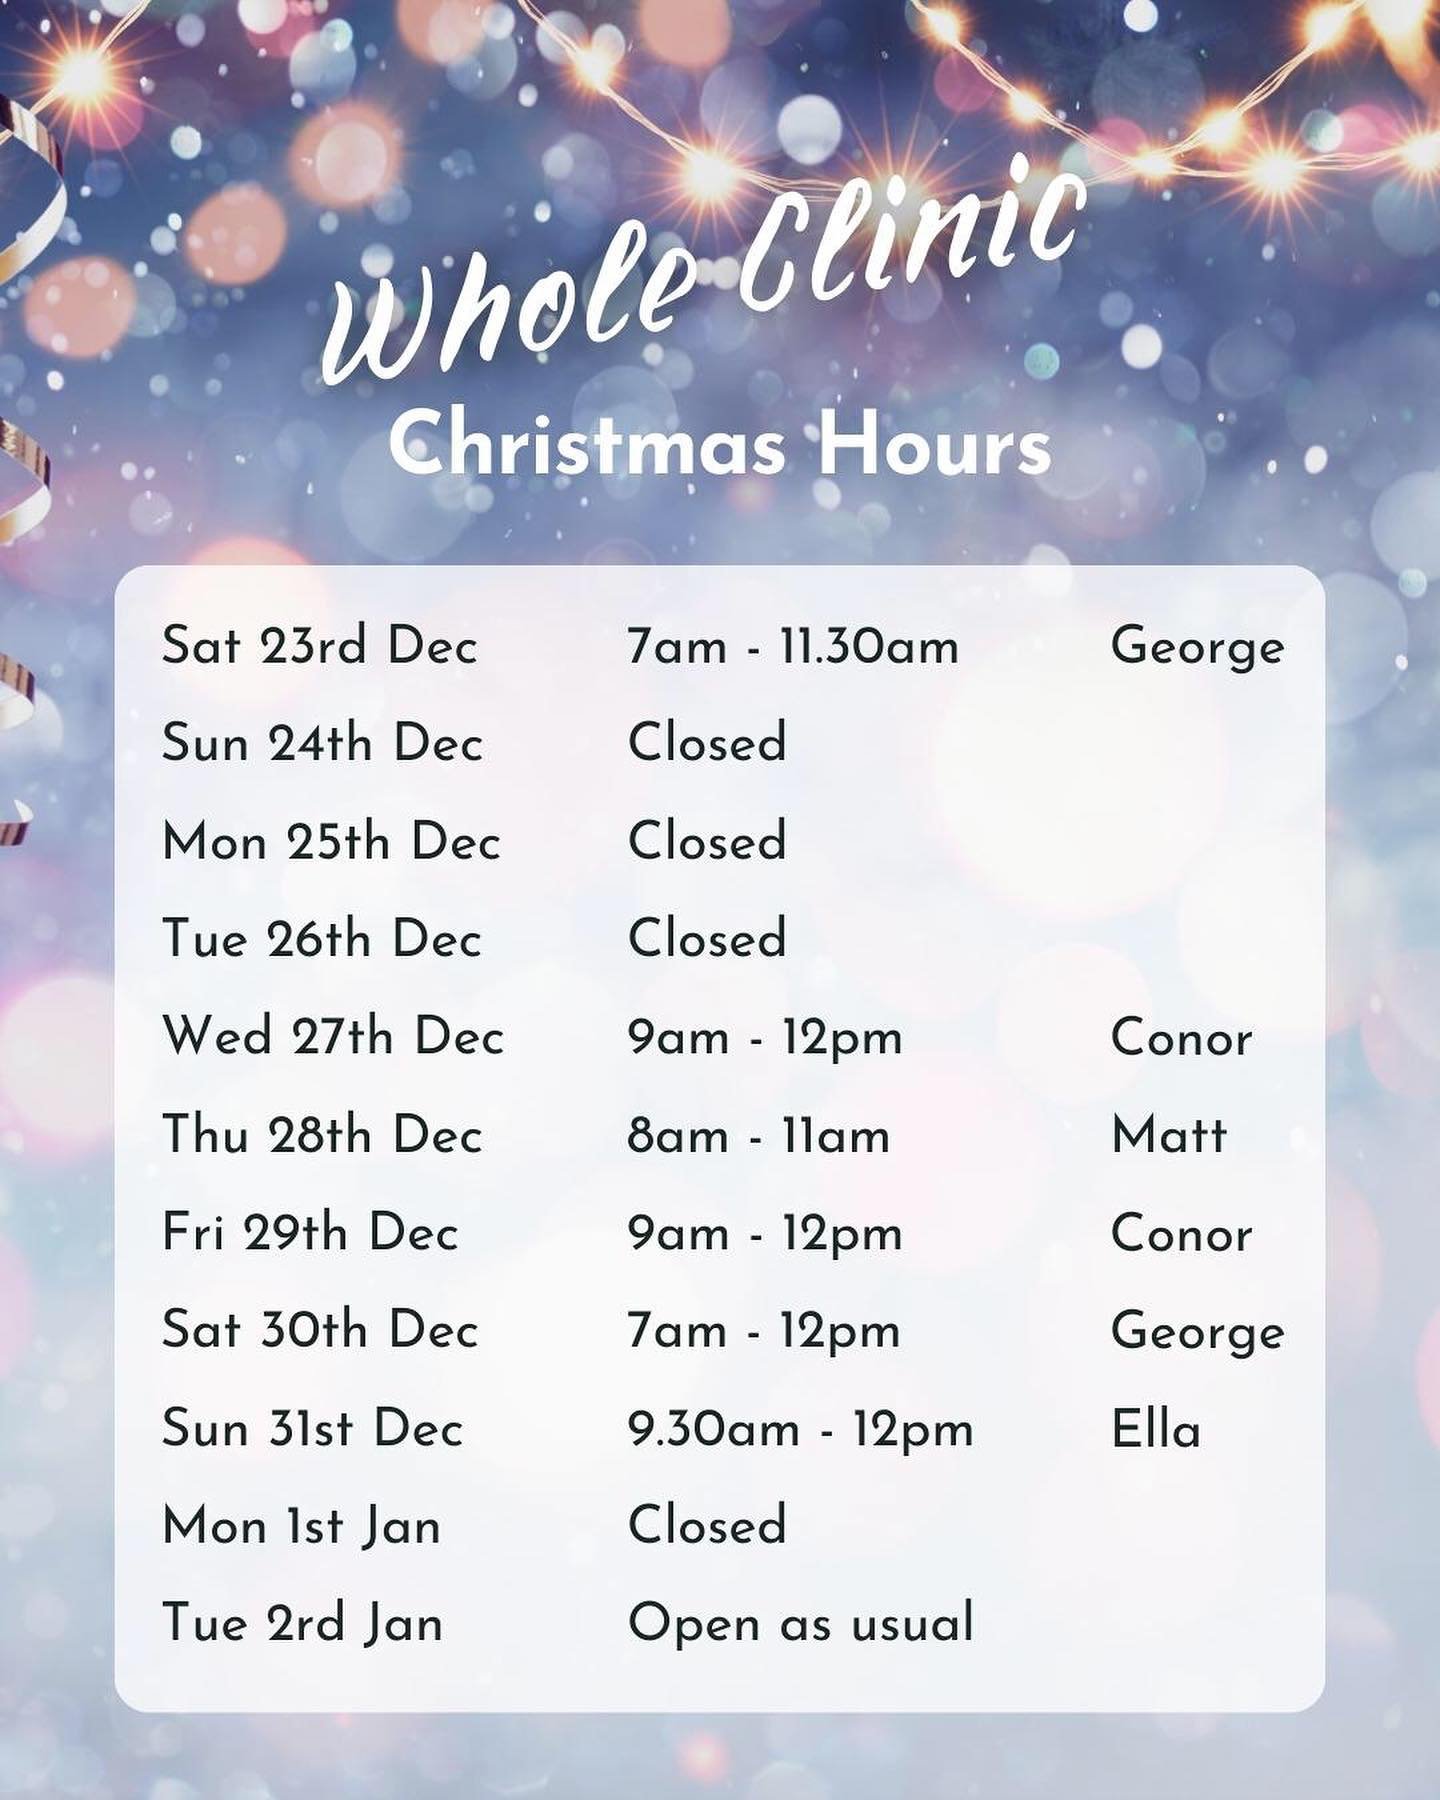 PCC Holiday Hours - books are already getting busy as we approach the end of the year!! 

Call 020 87856144 to make your pre Chrissie appointment 🎄💆